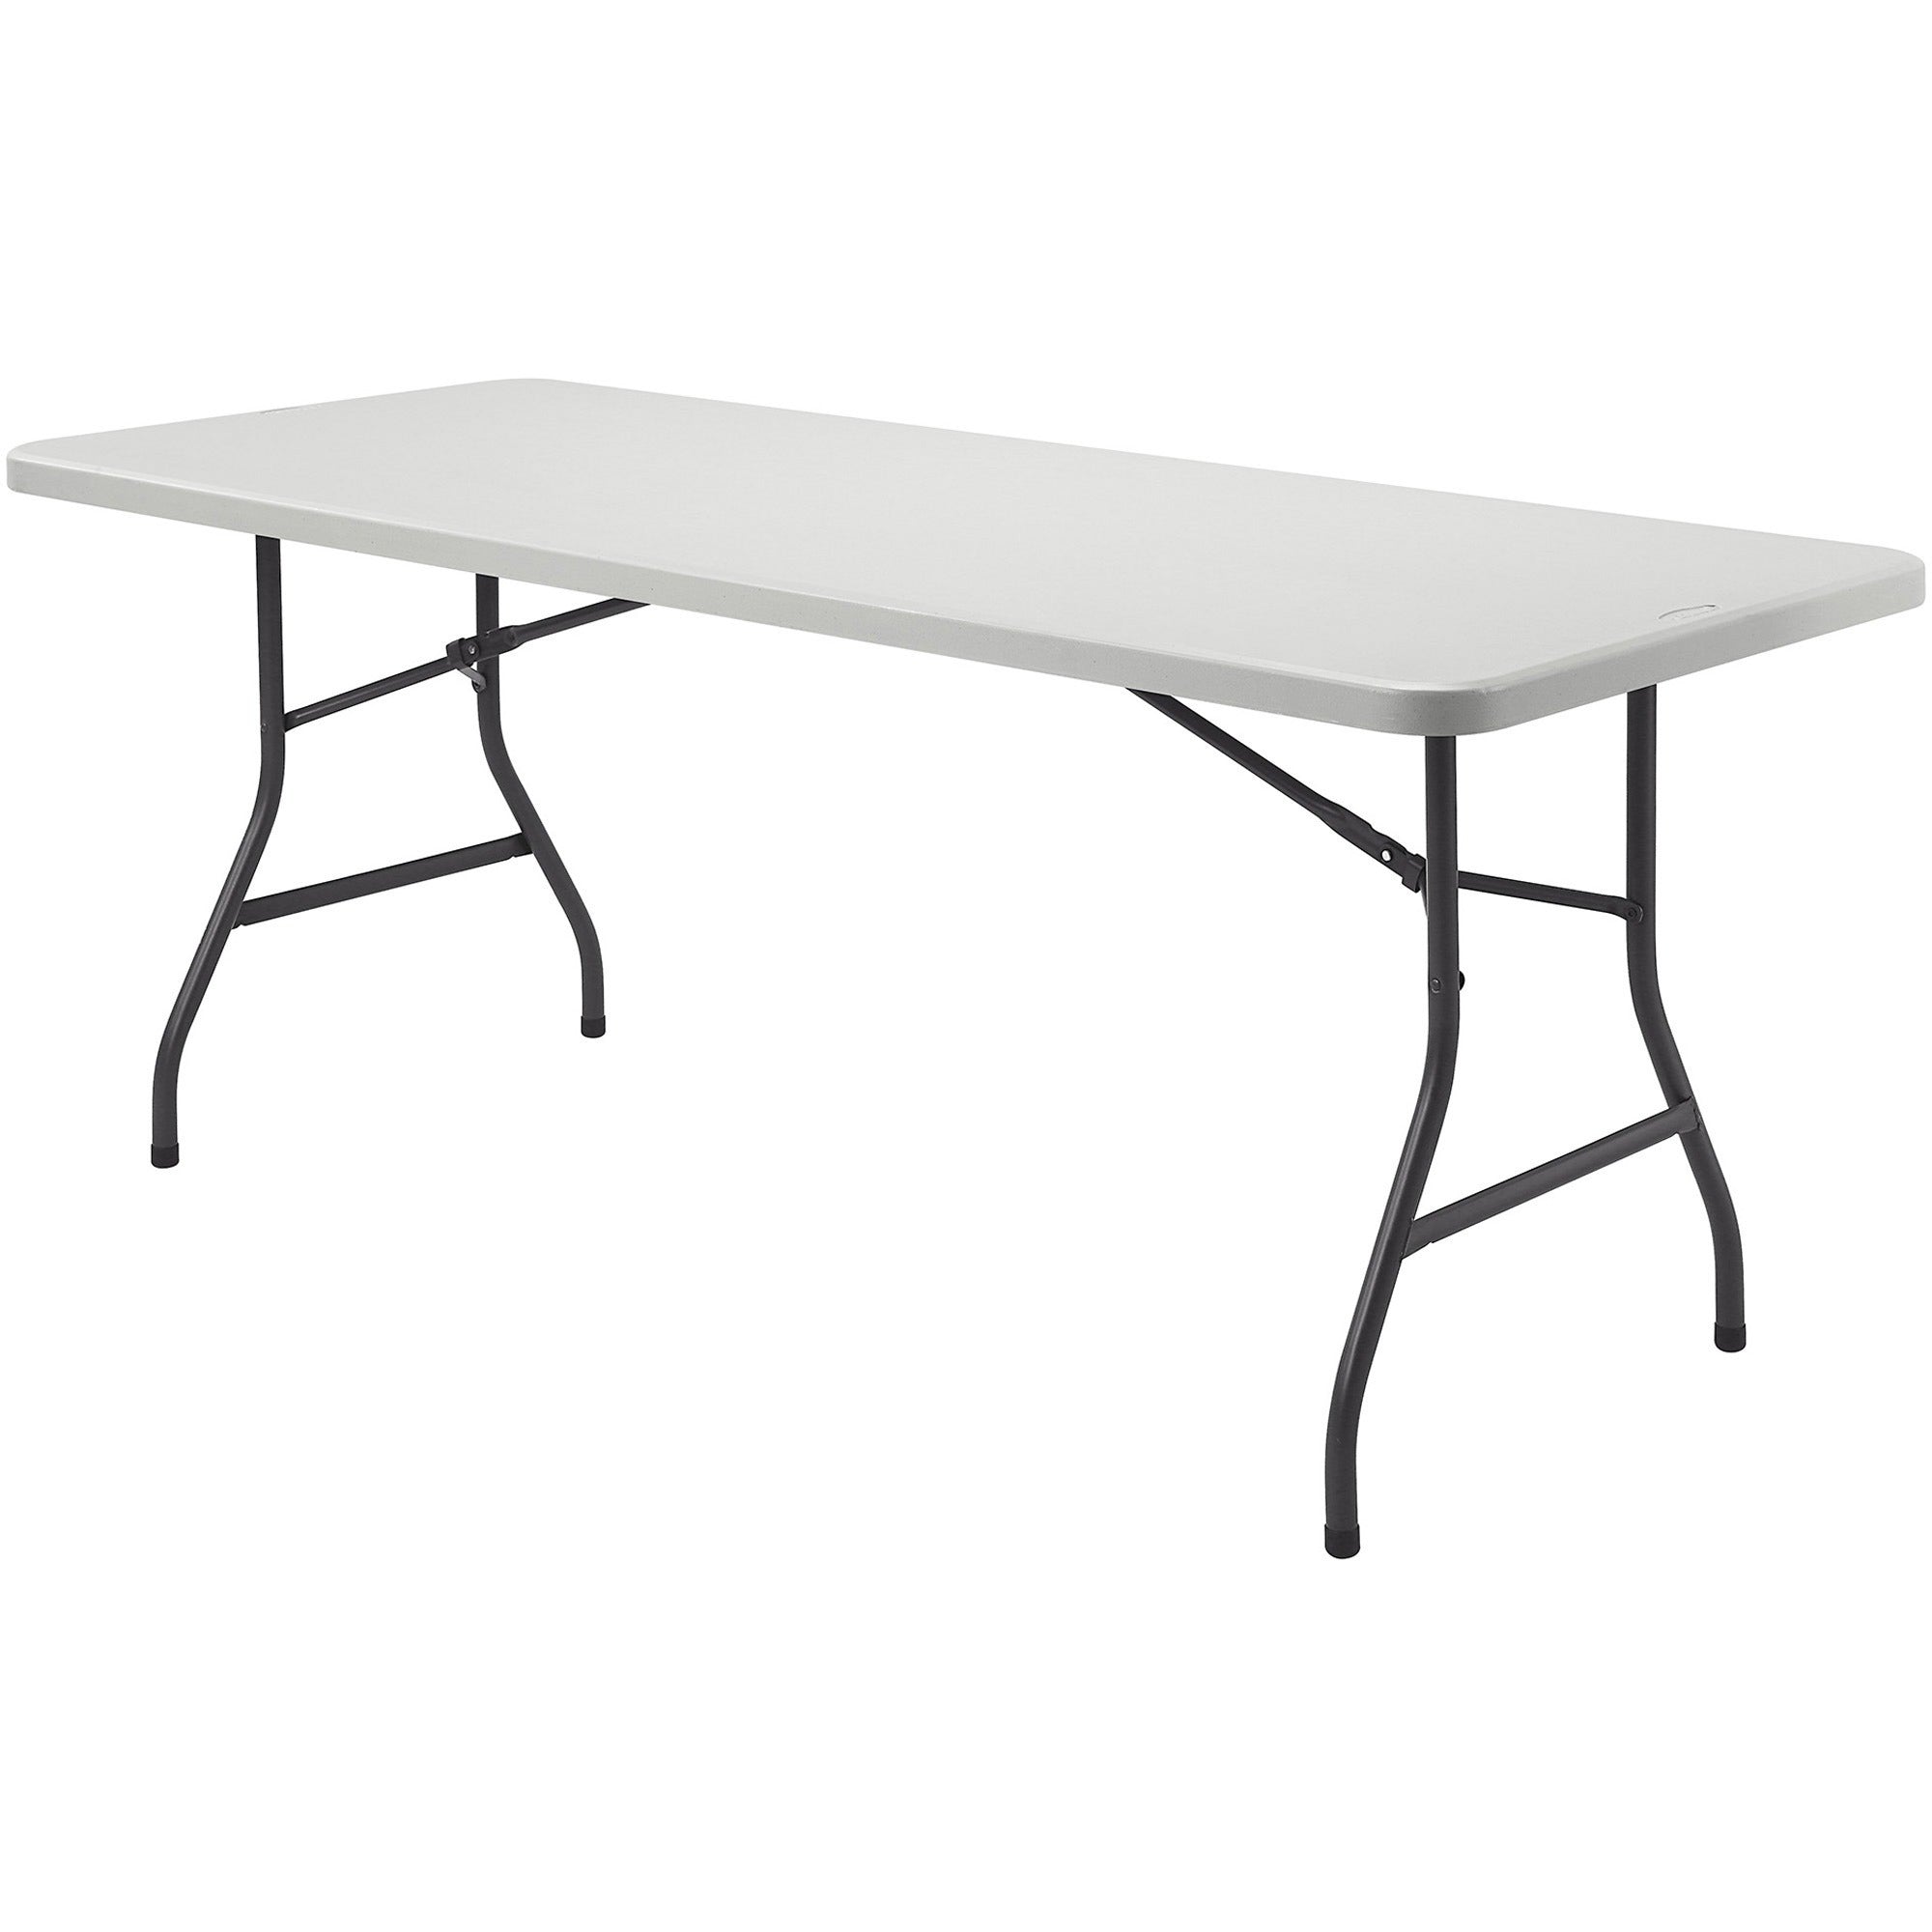 lorell-ultra-lite-banquet-table-for-table-toplight-gray-rectangle-top-dark-gray-base-600-lb-capacity-x-72-table-top-width-x-30-table-top-depth-x-2-table-top-thickness-29-height-gray-1-each_llr66655 - 1